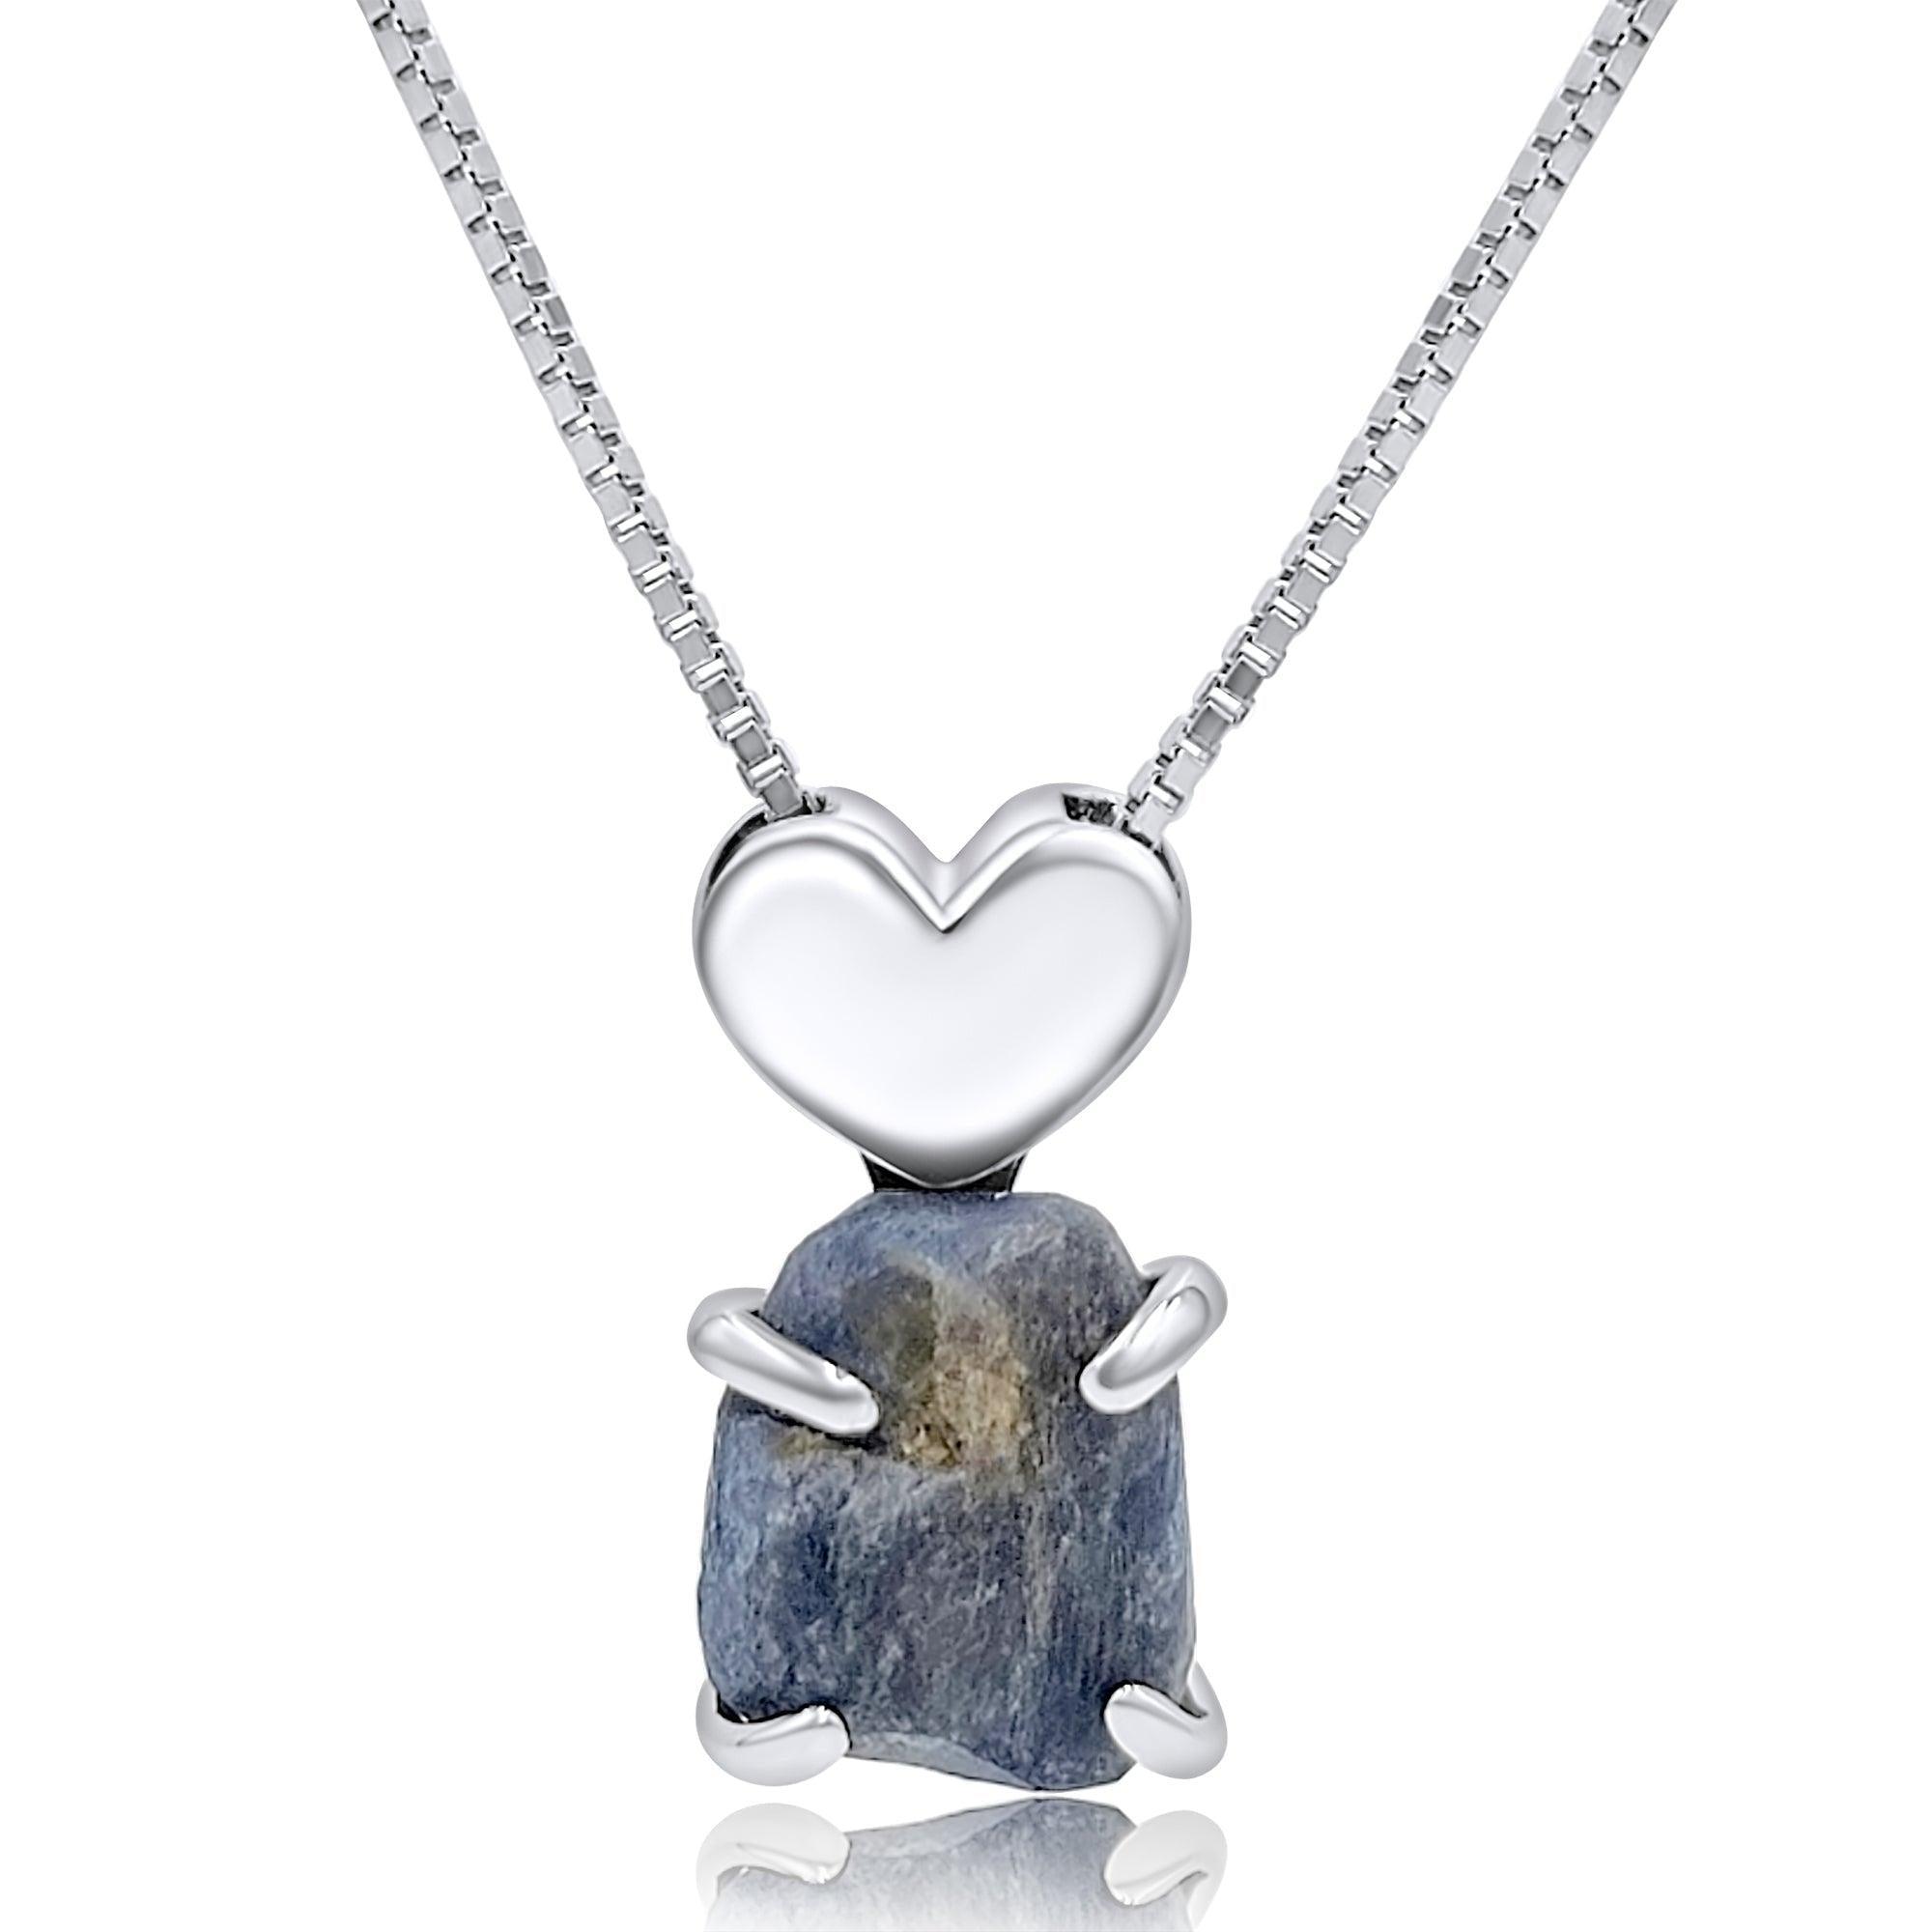 Real Raw Large Sapphire Necklace - Uniquelan Jewelry